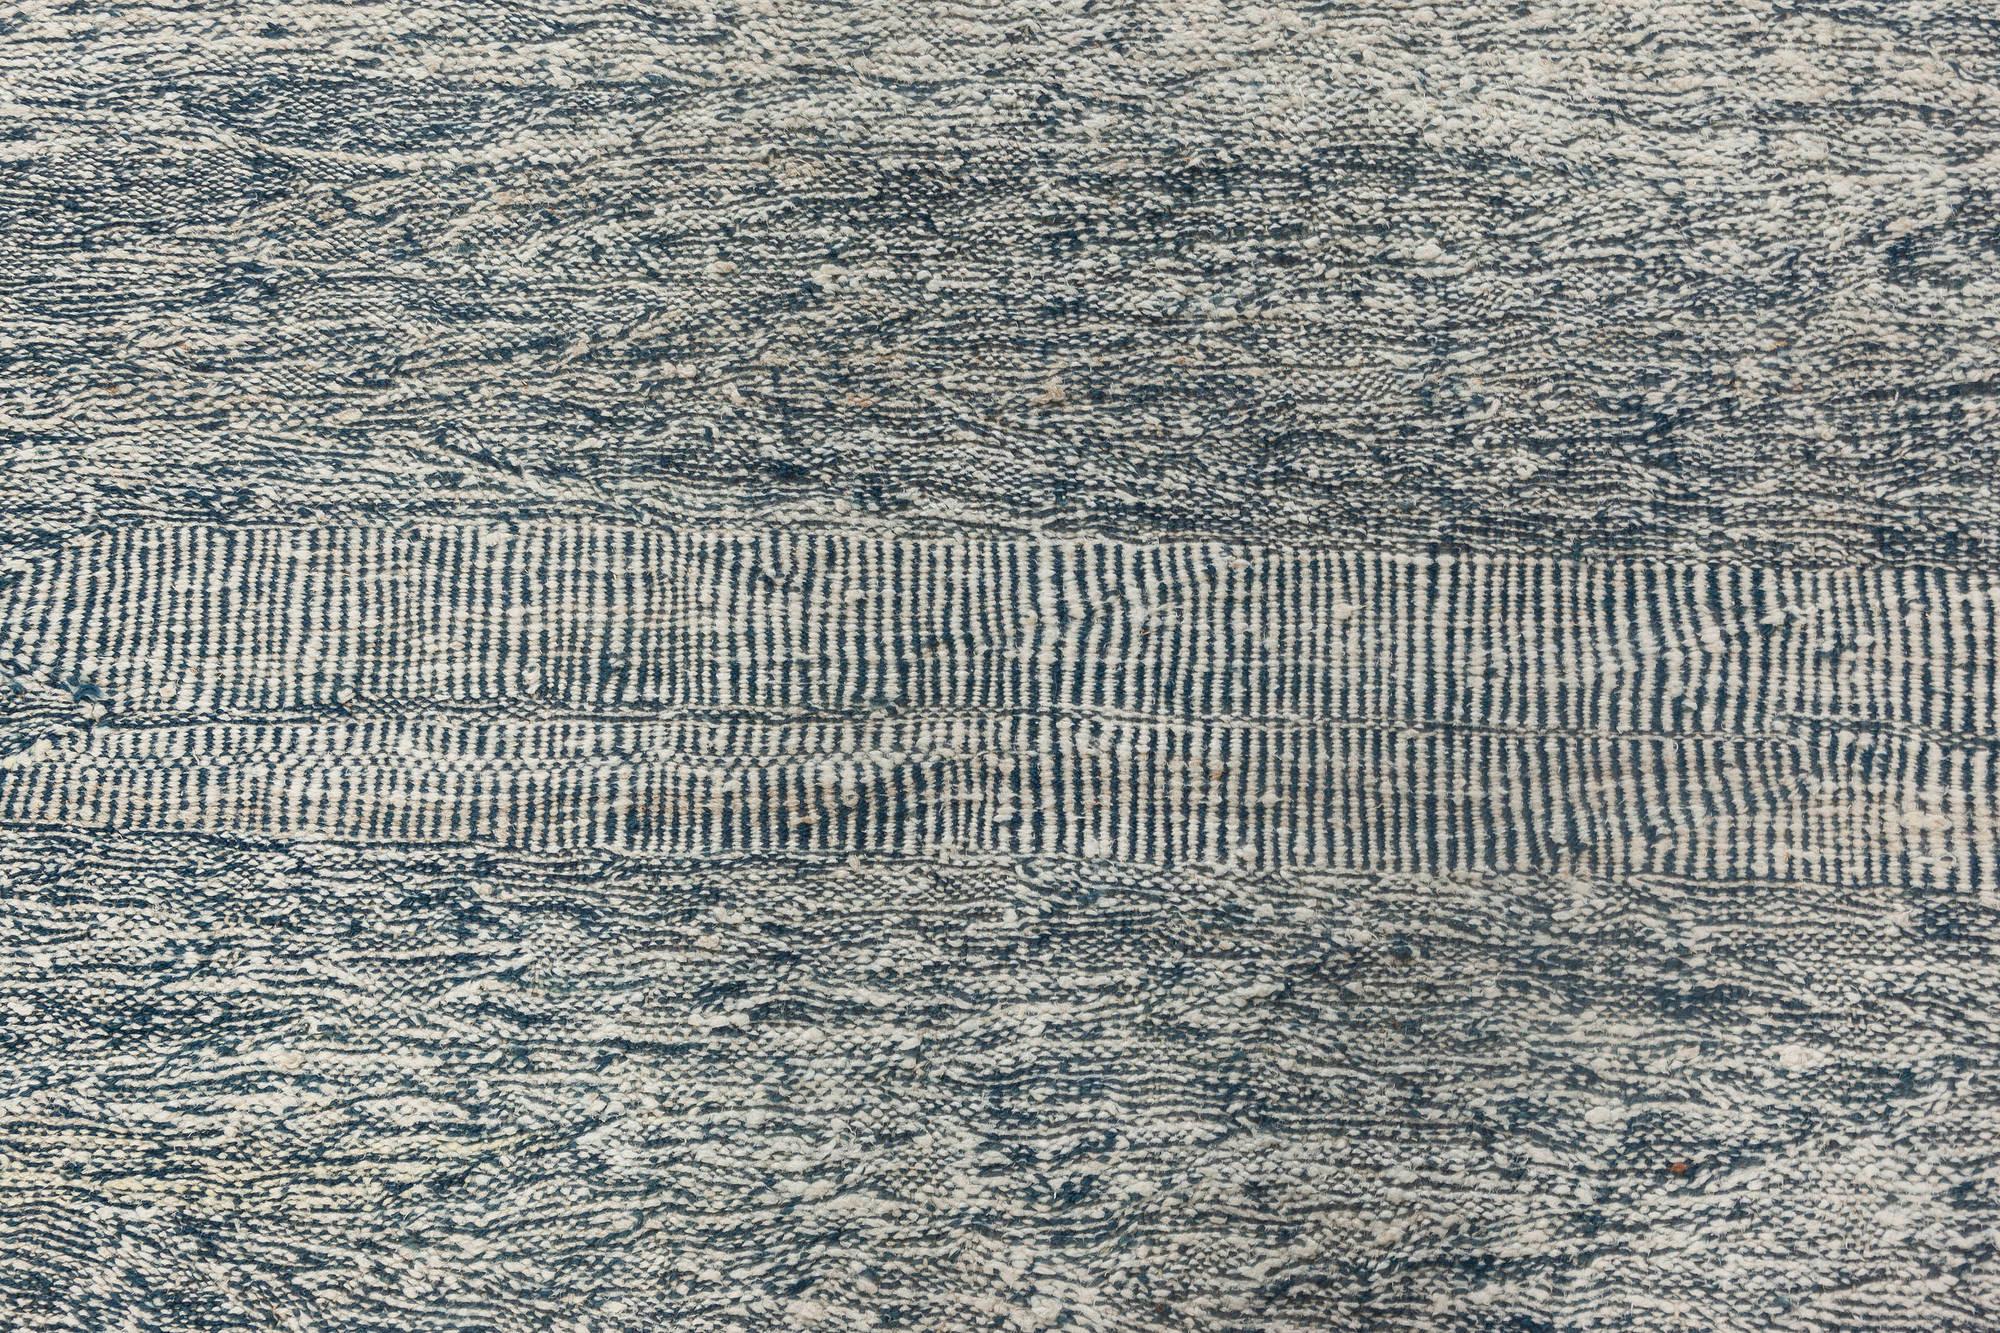 Hand-Woven Contemporary Blue and White Flat-Weave Wool Rug by Doris Leslie Blau For Sale